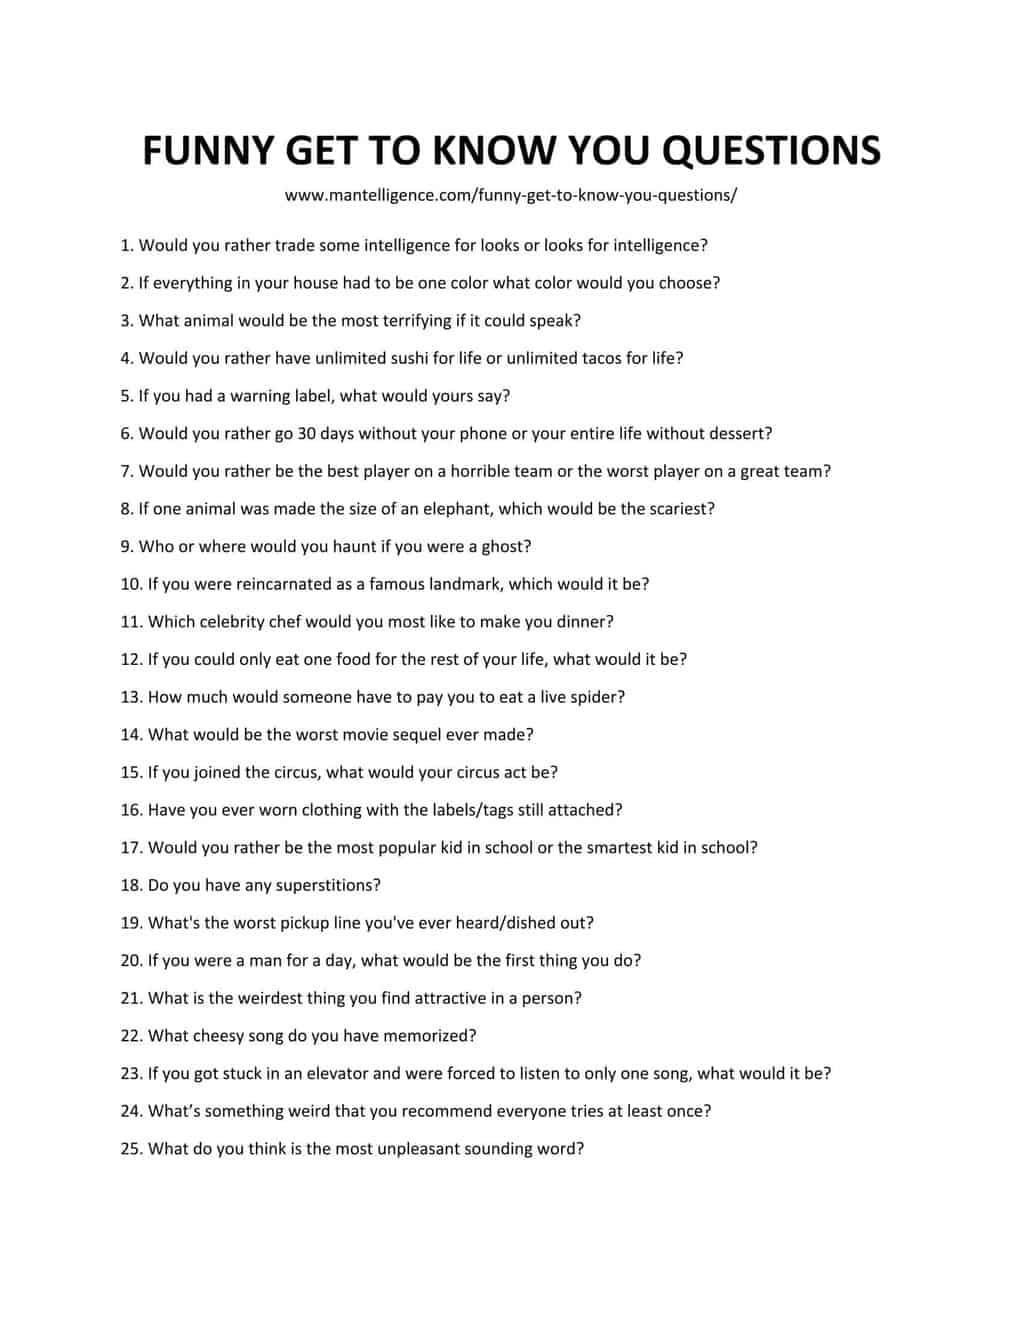 List of Funny Get to Know You Questions